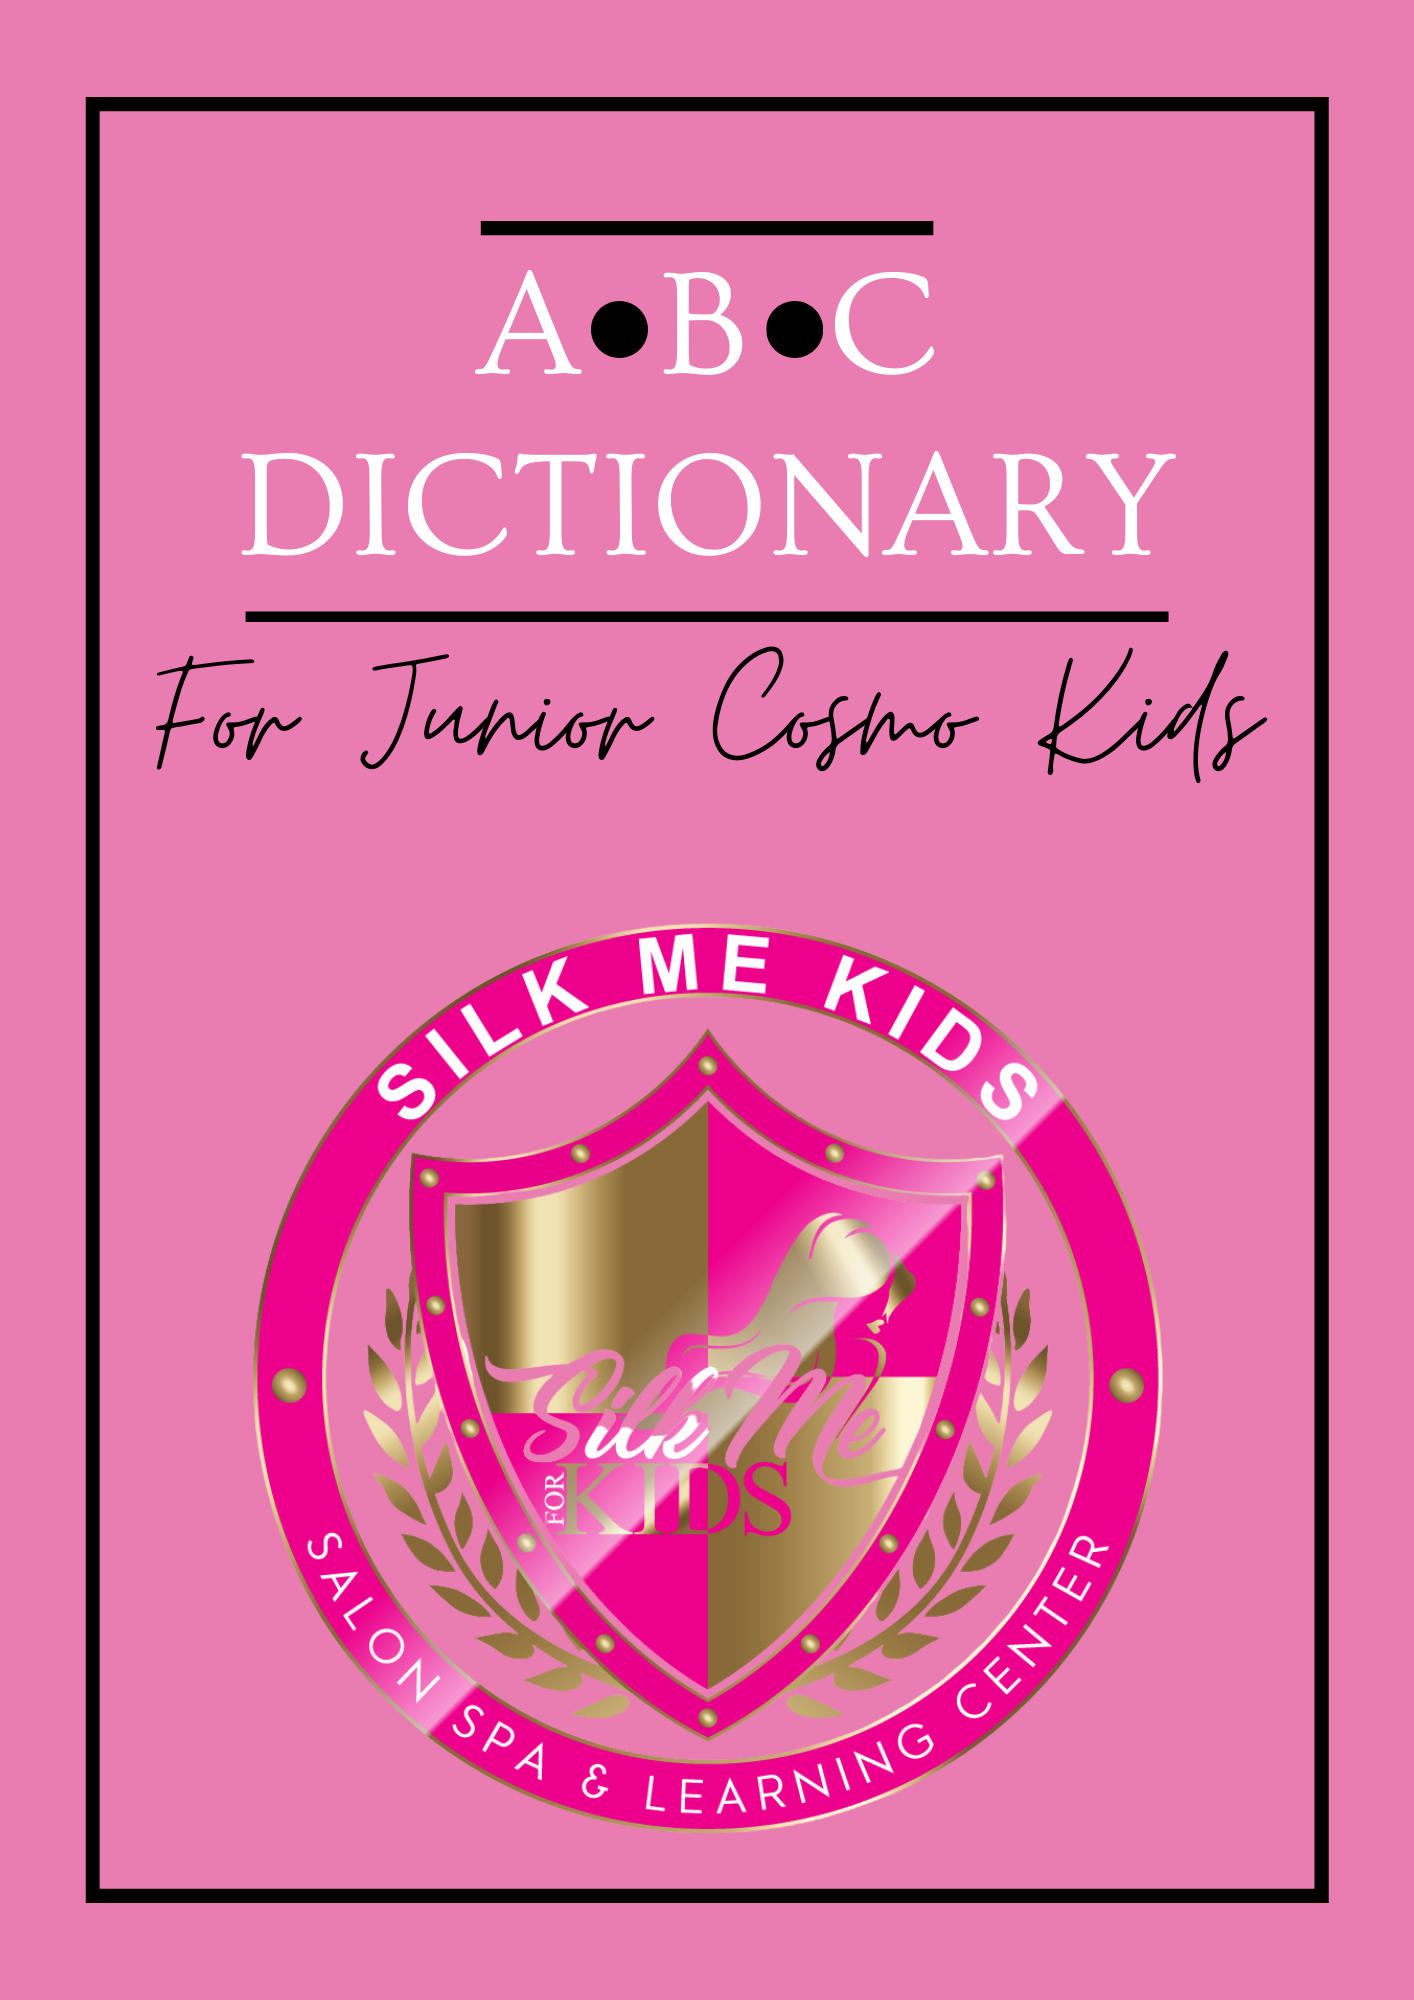 ABC DICTIONARY FOR JUNIOR COSMO KIDS